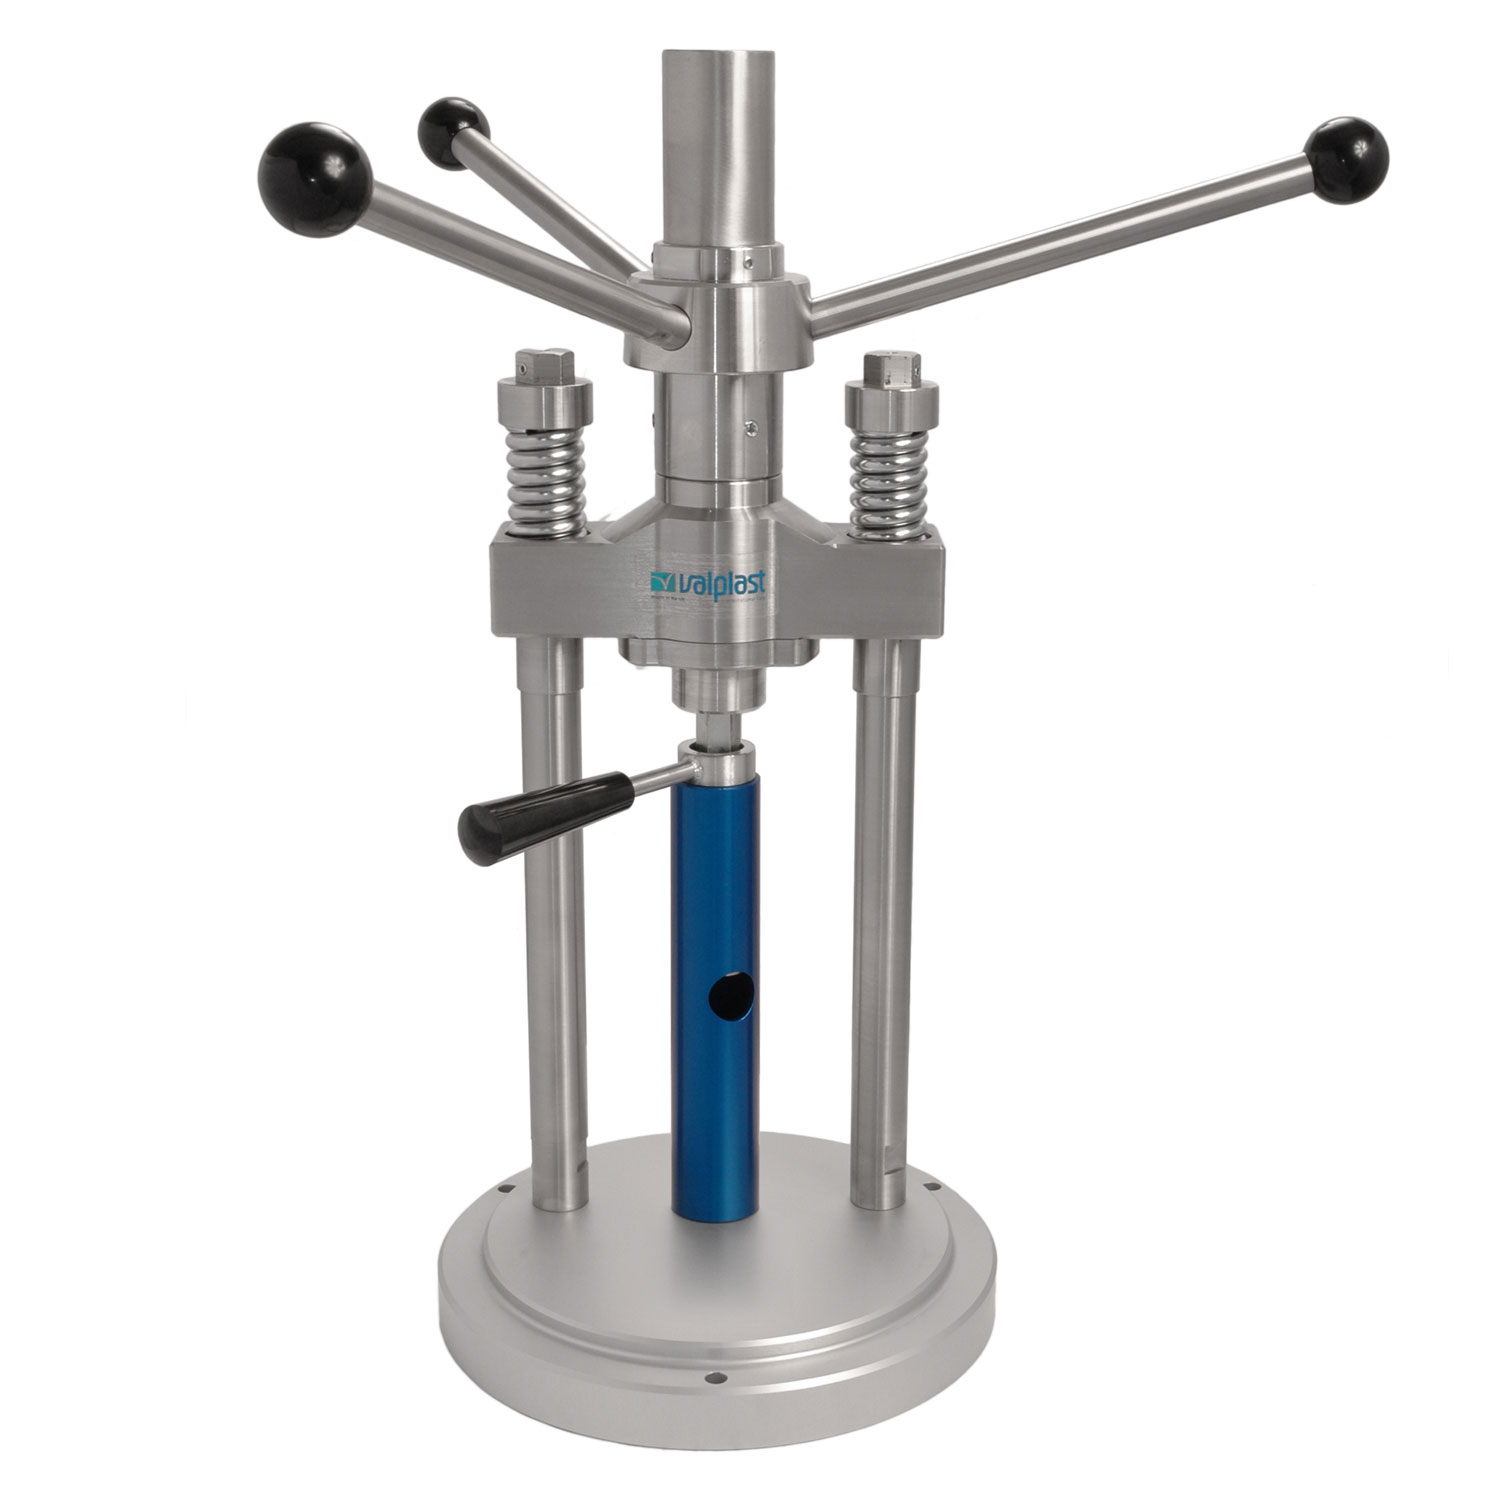 The Momentum Manual Press with Transfer Cylinder and Tube Ejector